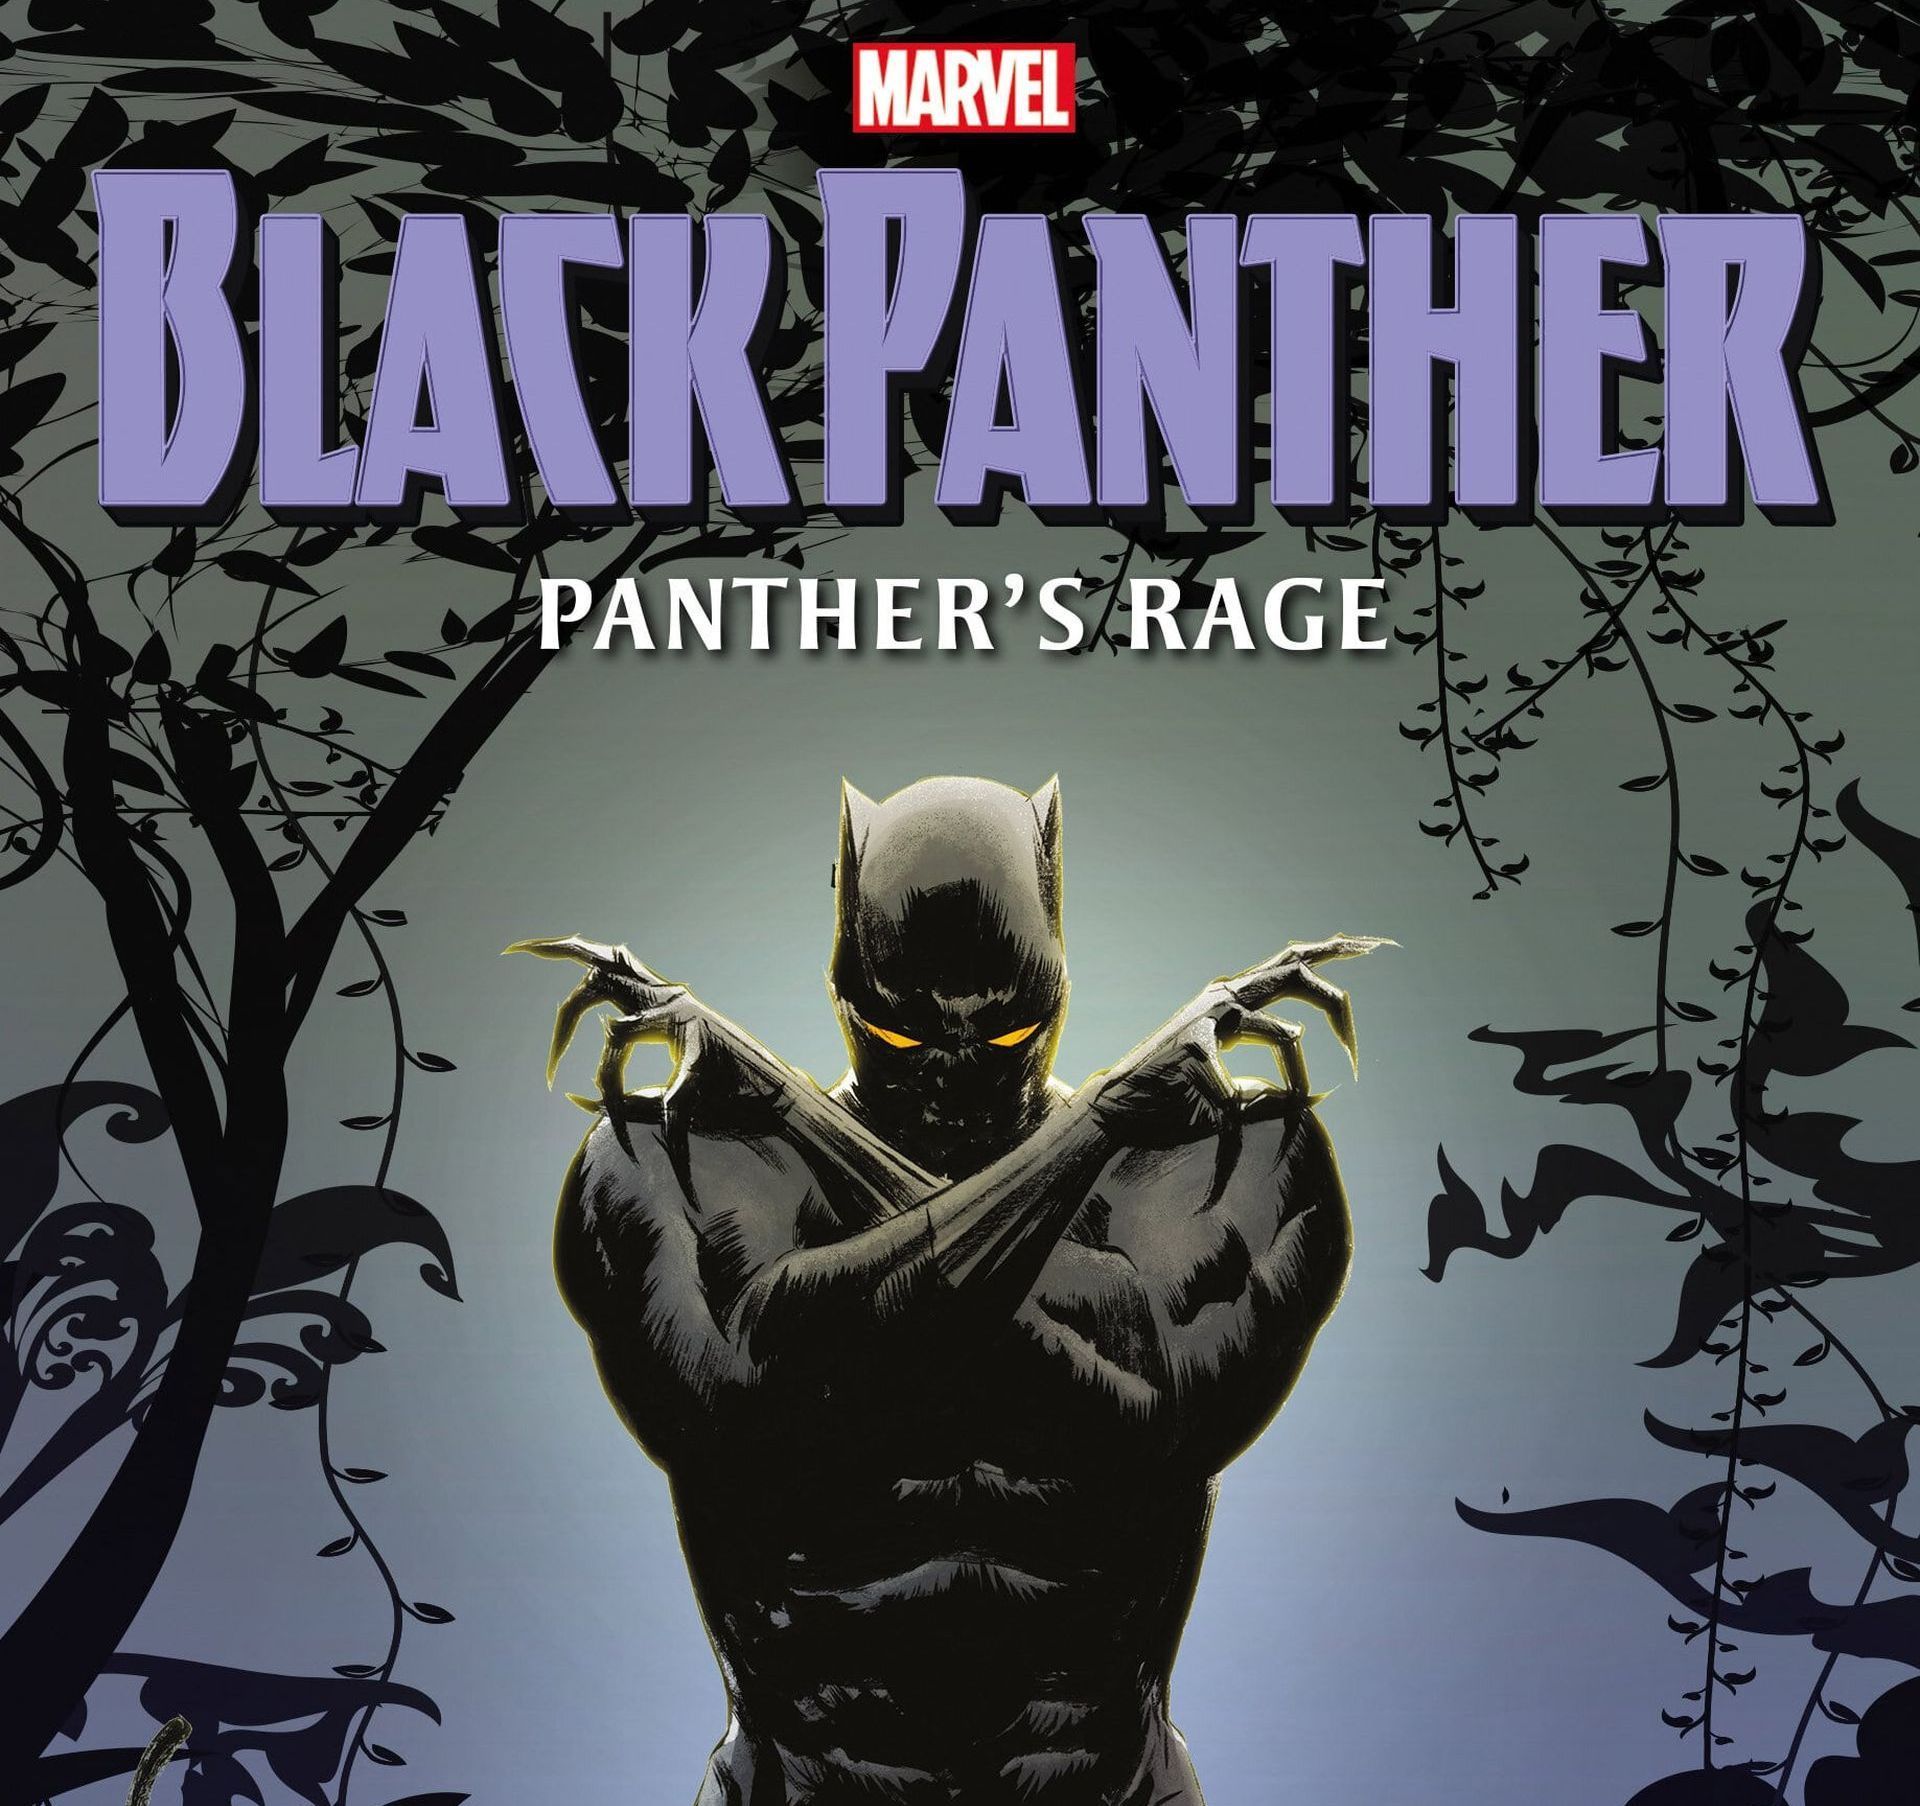 New Black Panther game